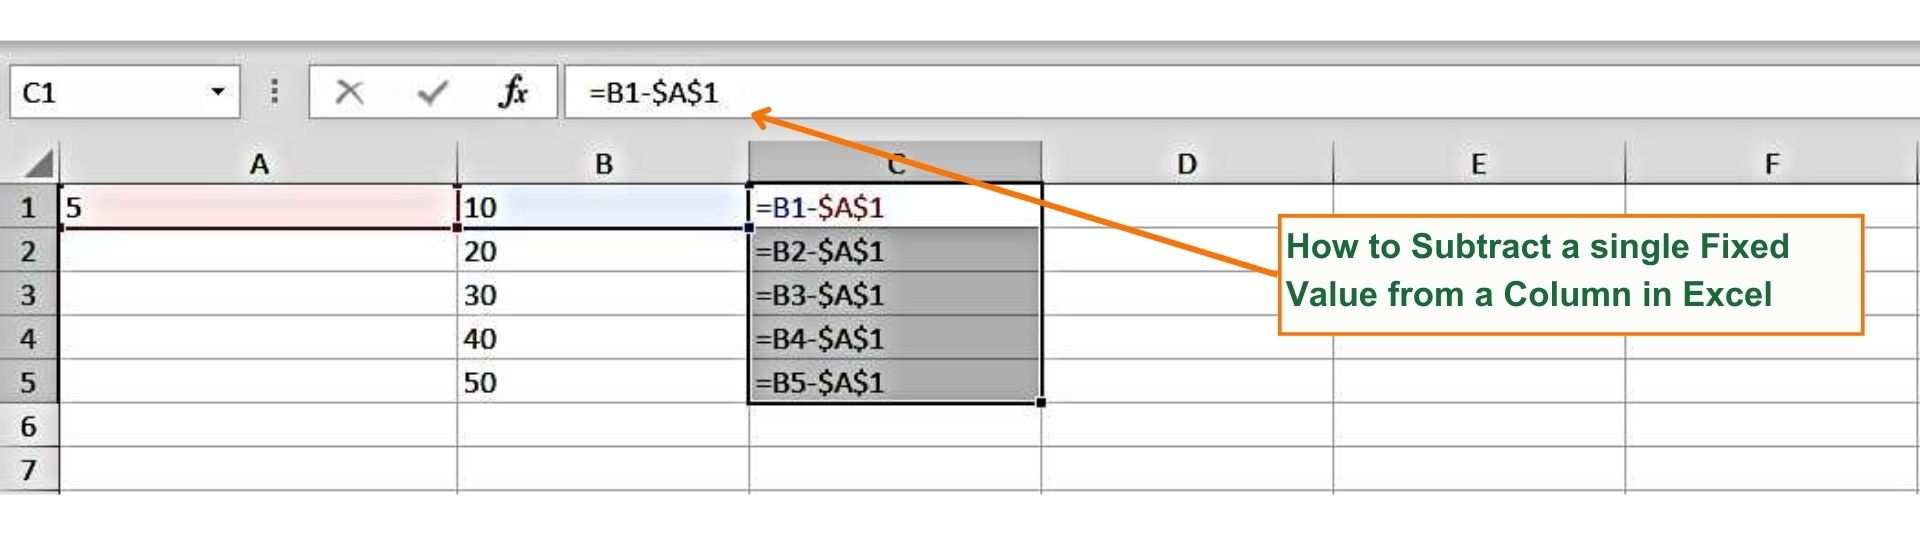 How to Subtract a single Fixed Value from a Column in Excel - Excel Hippo